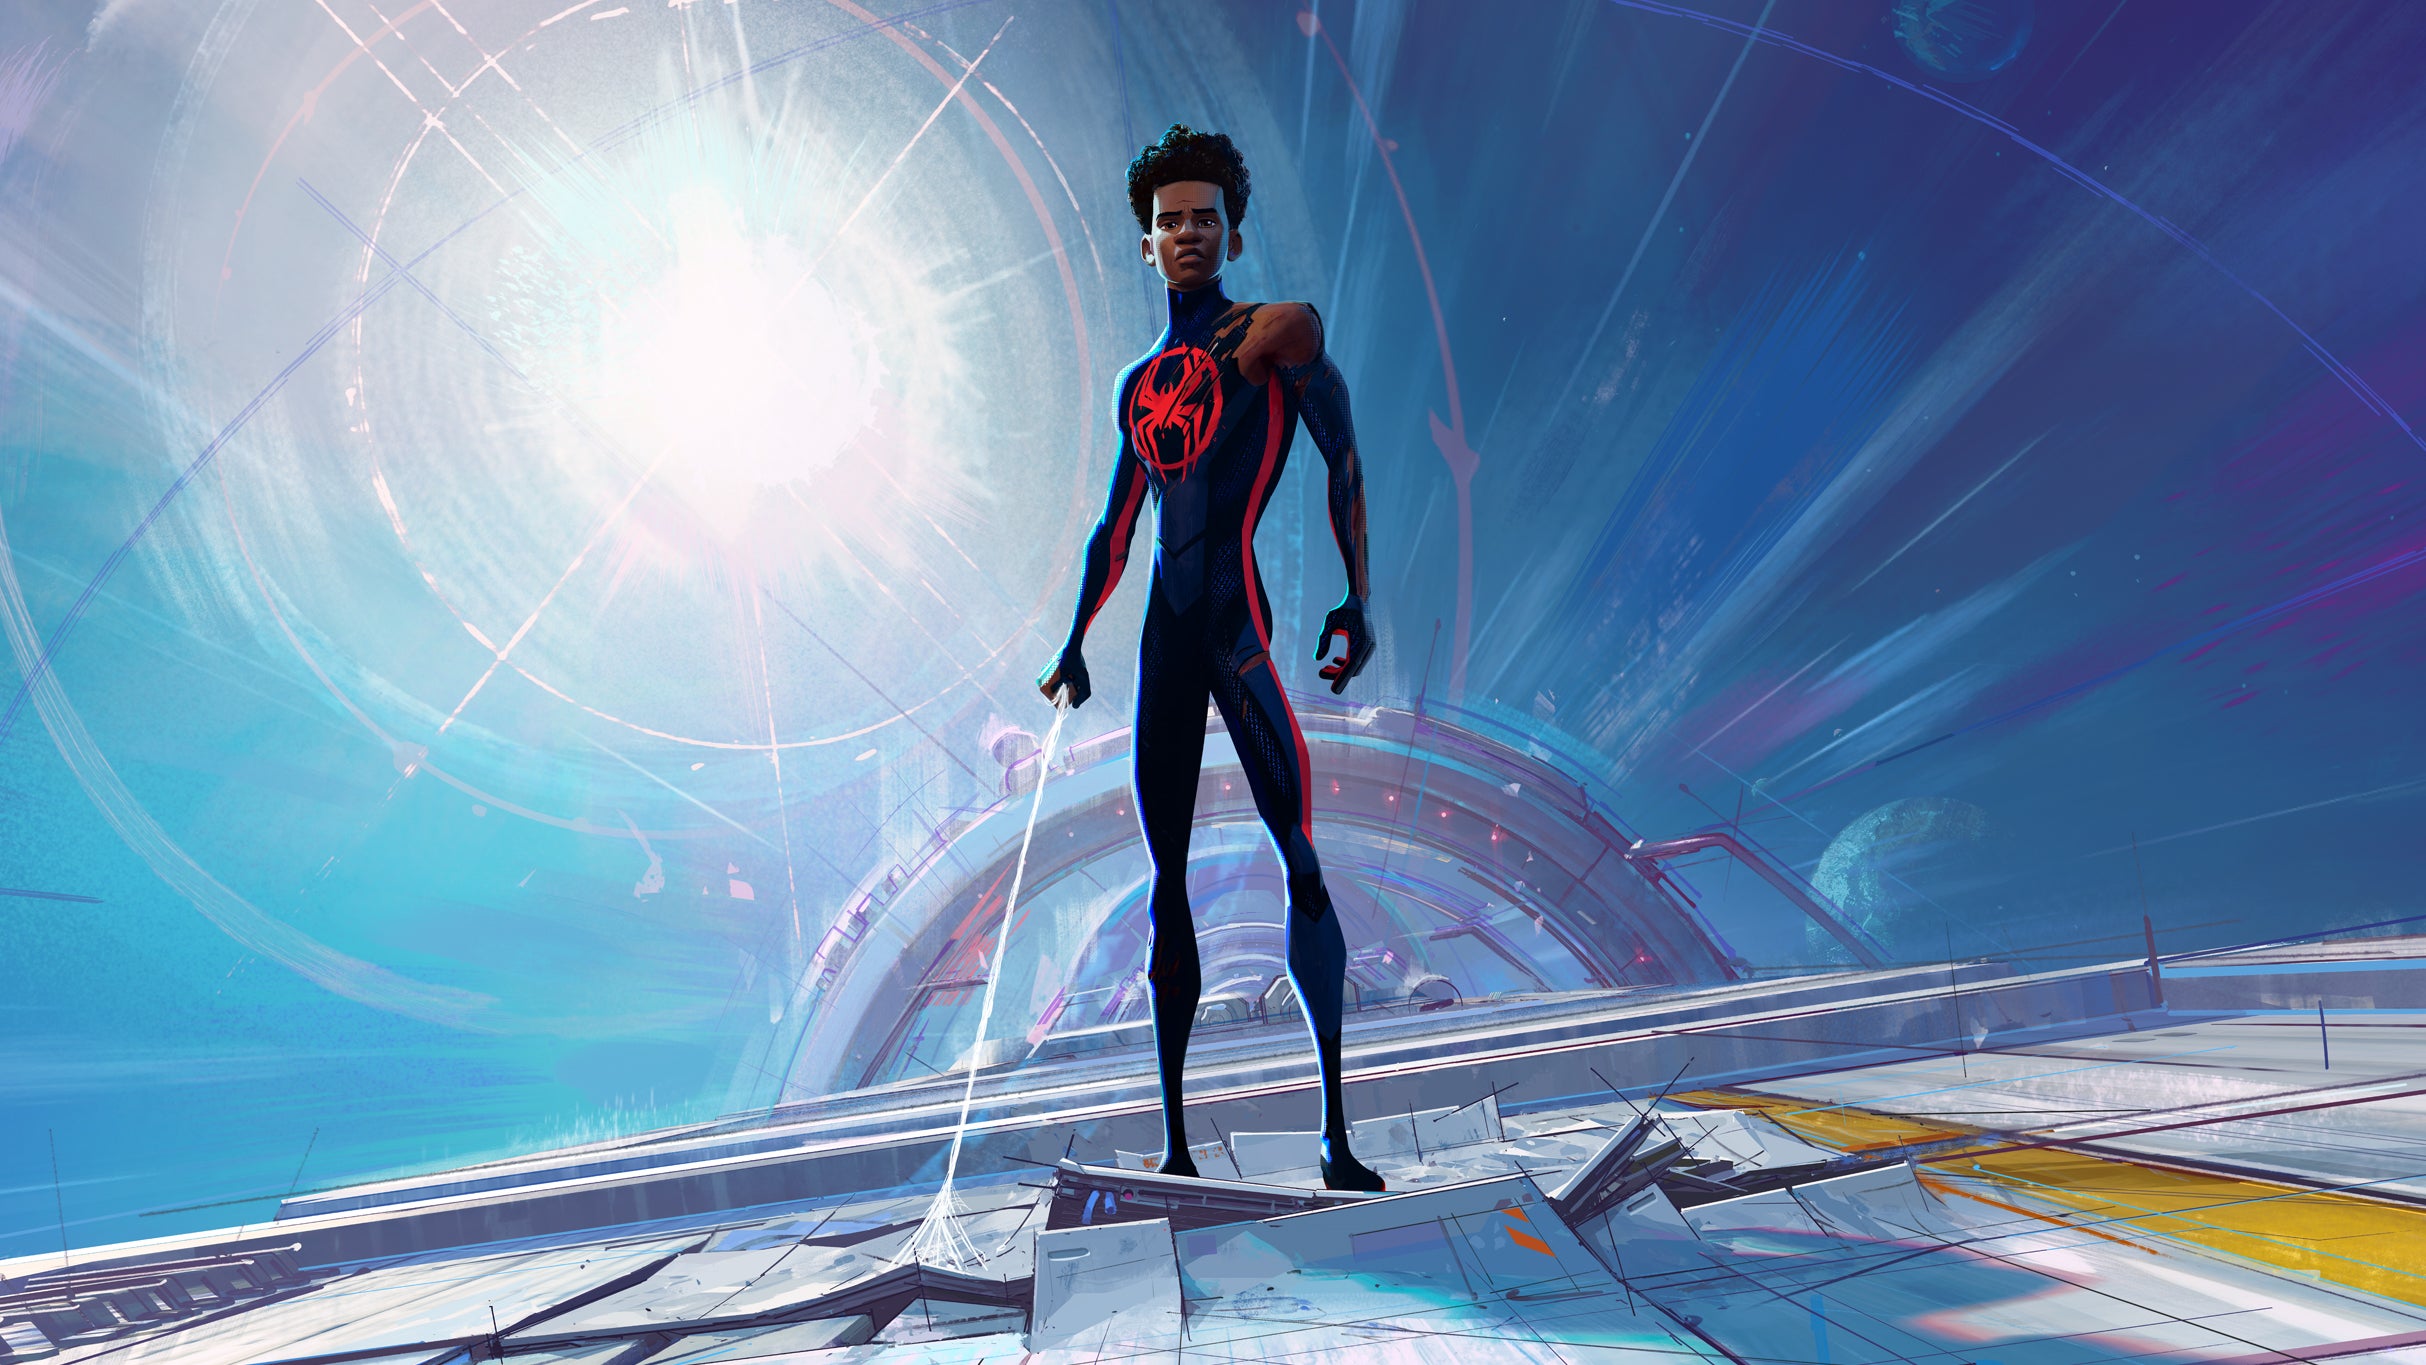 Spider-Man: Across The Spider-Verse - Live In Concert in Washington promo photo for Ticketmaster presale offer code